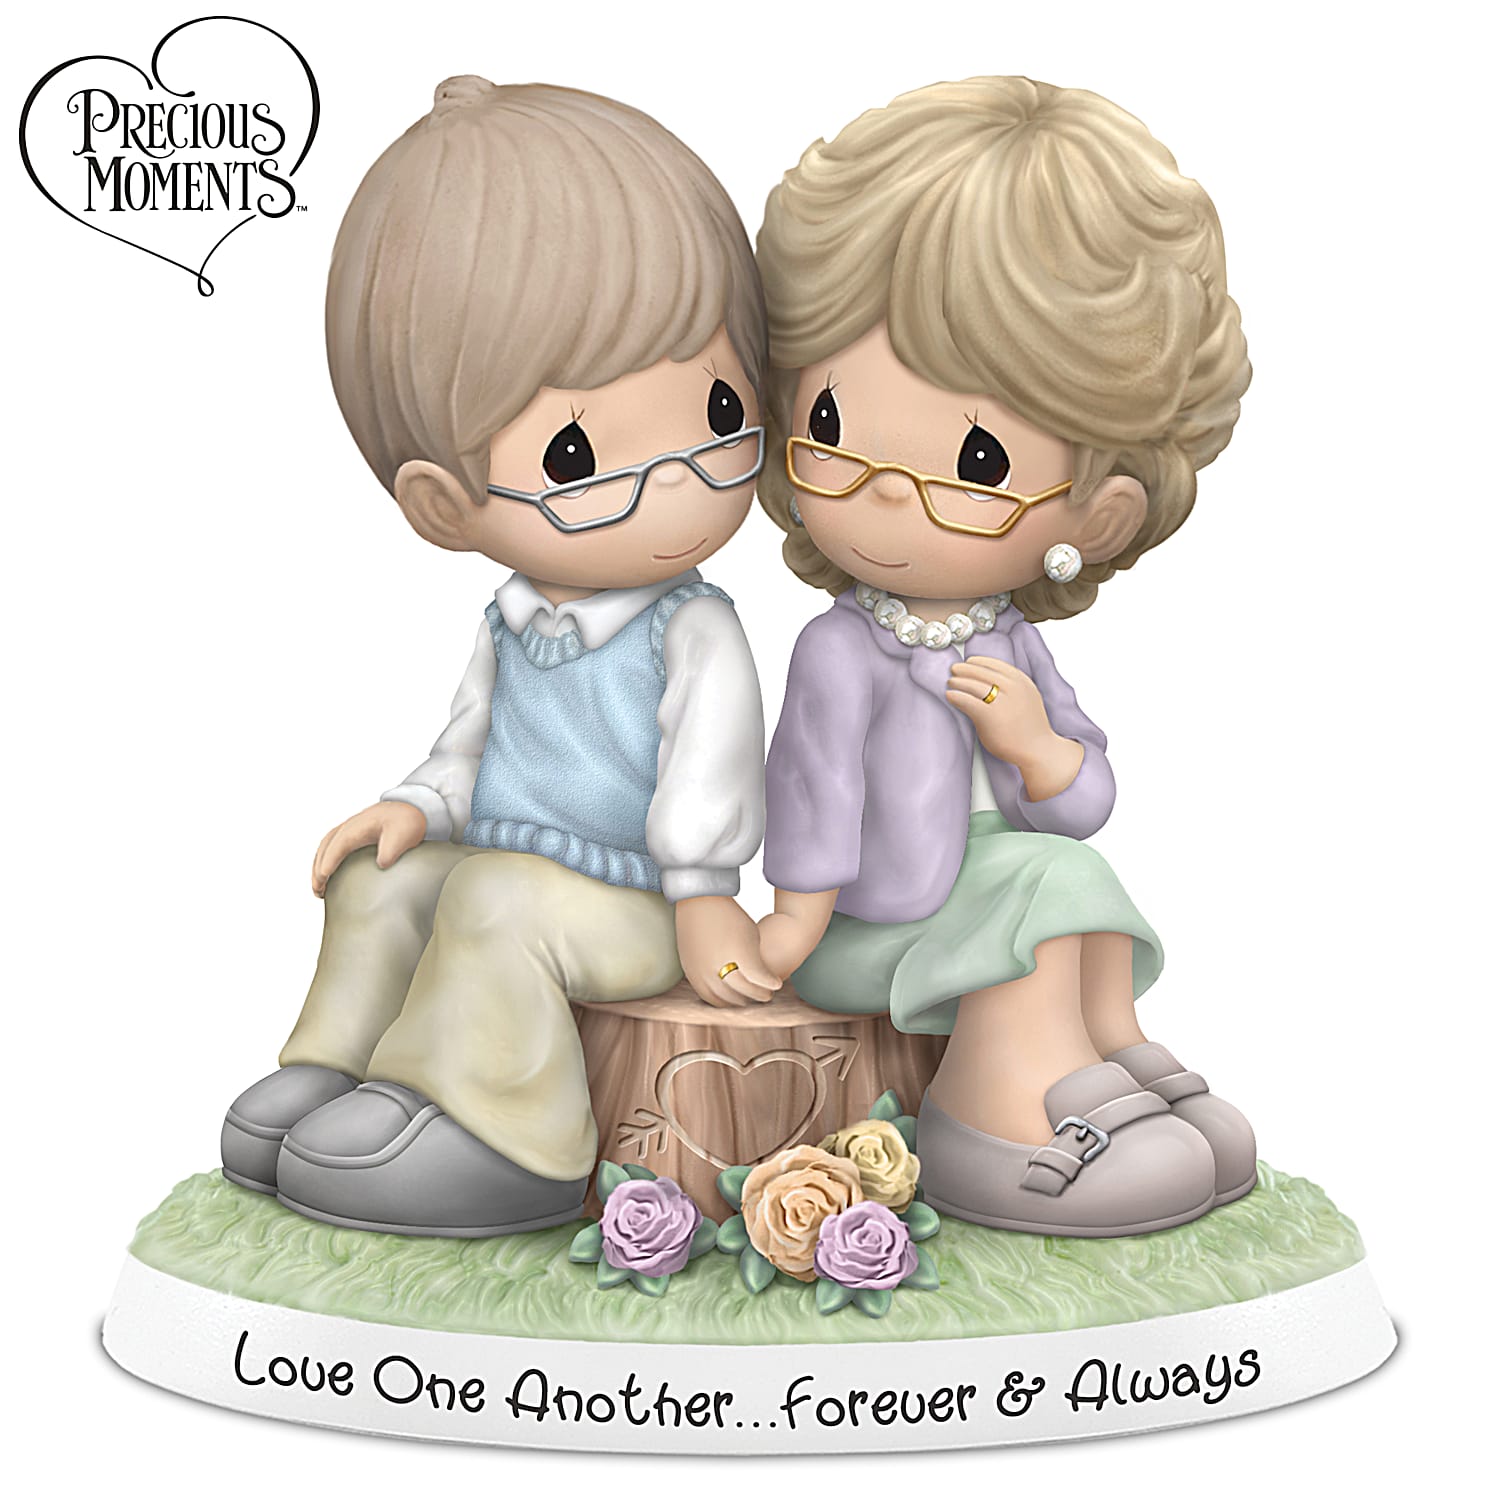 Precious Moments Love One Another Forever & Always Hand-Painted